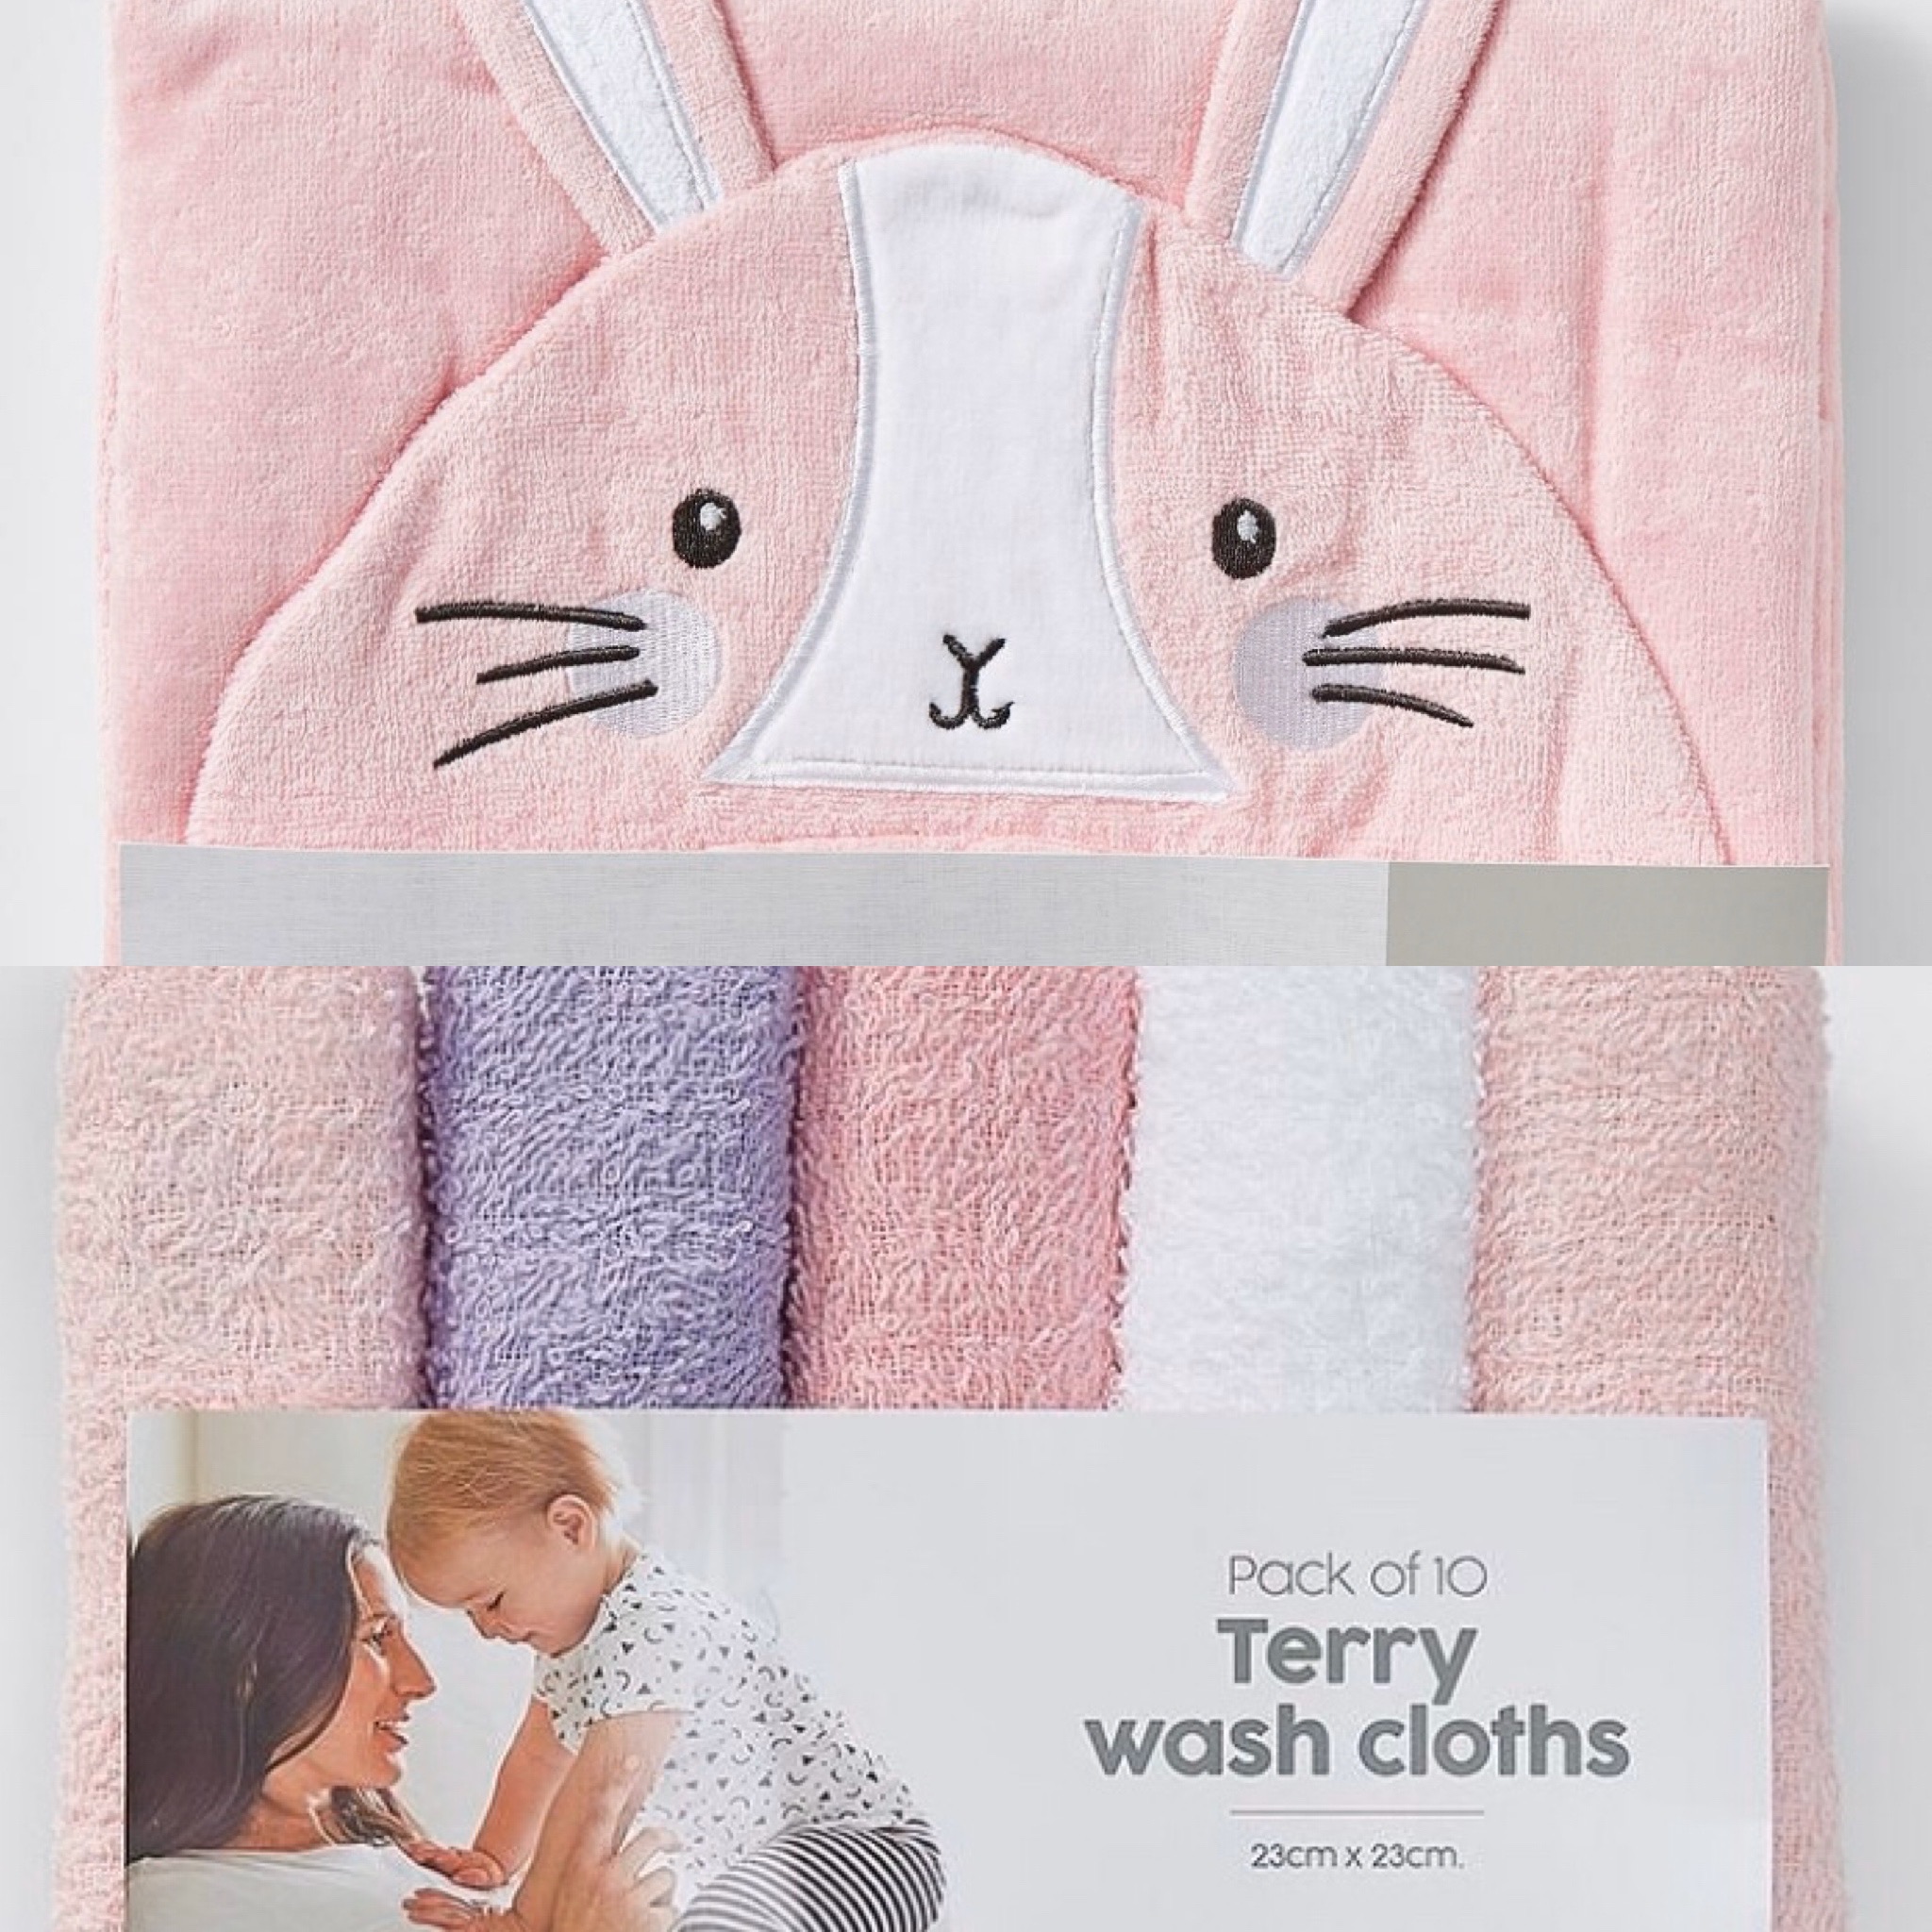 Hooded towels, baby face washers